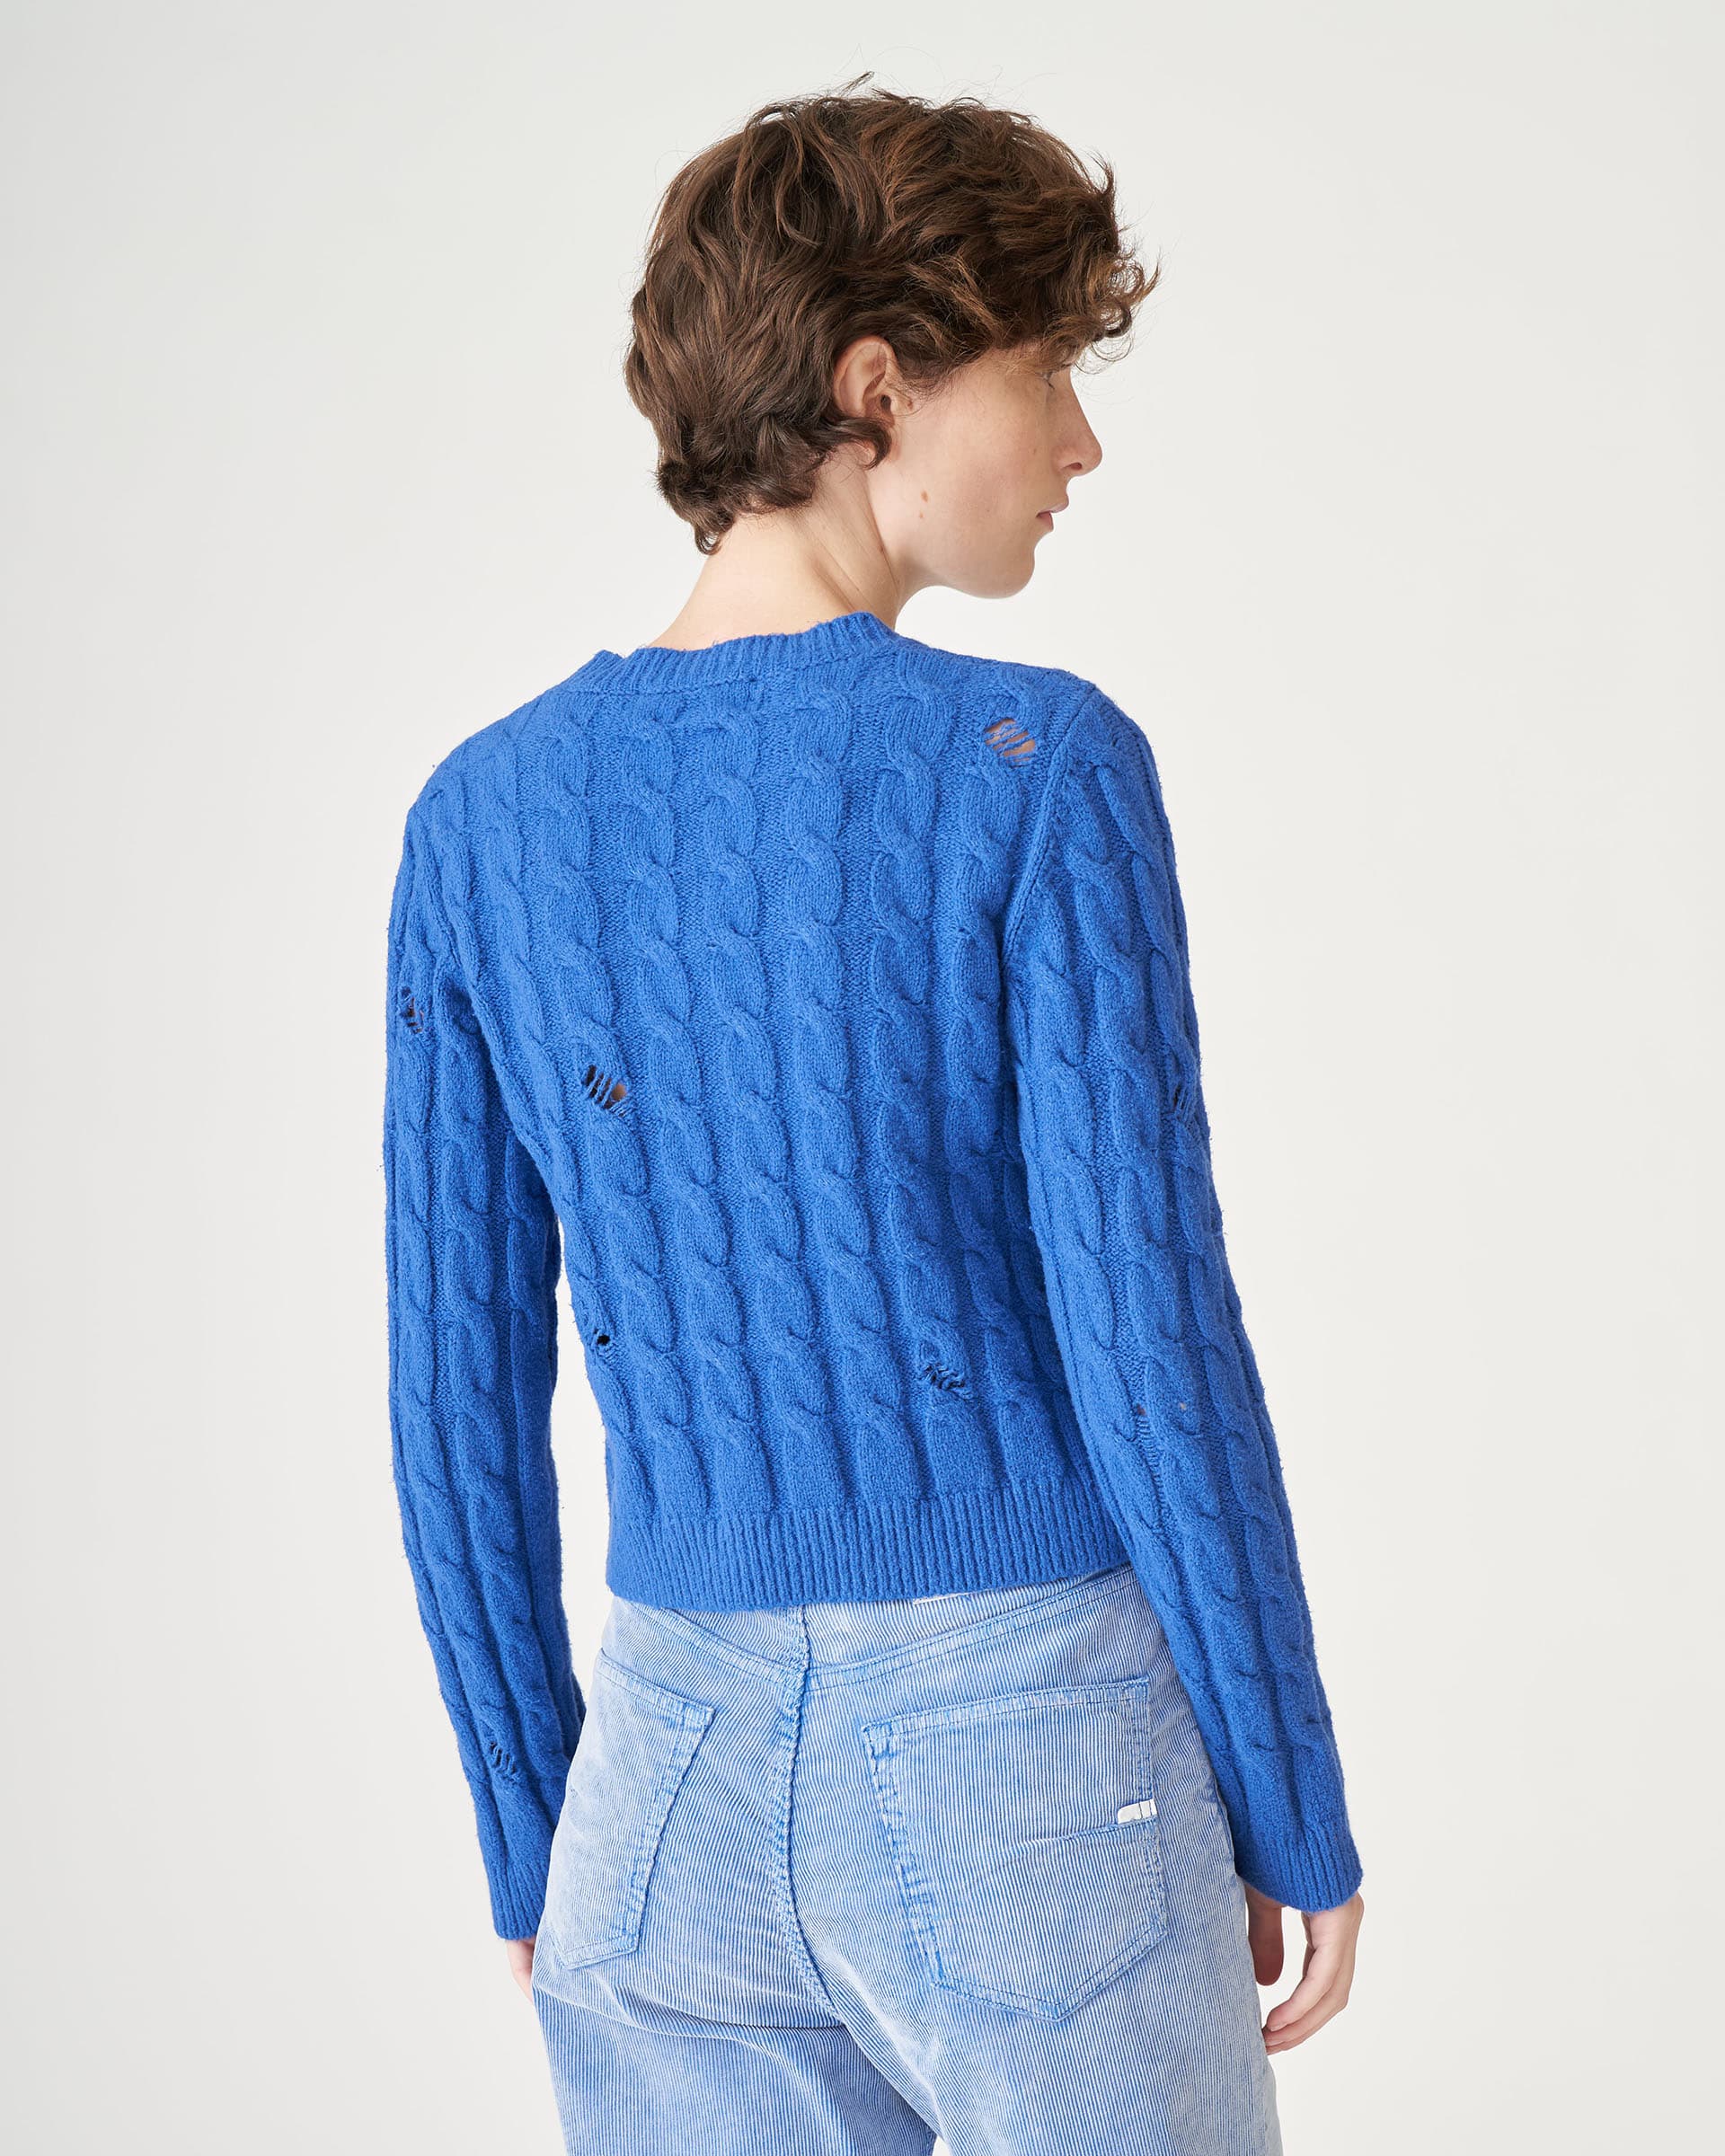 The Market Store | Crewneck Sweater With Cables